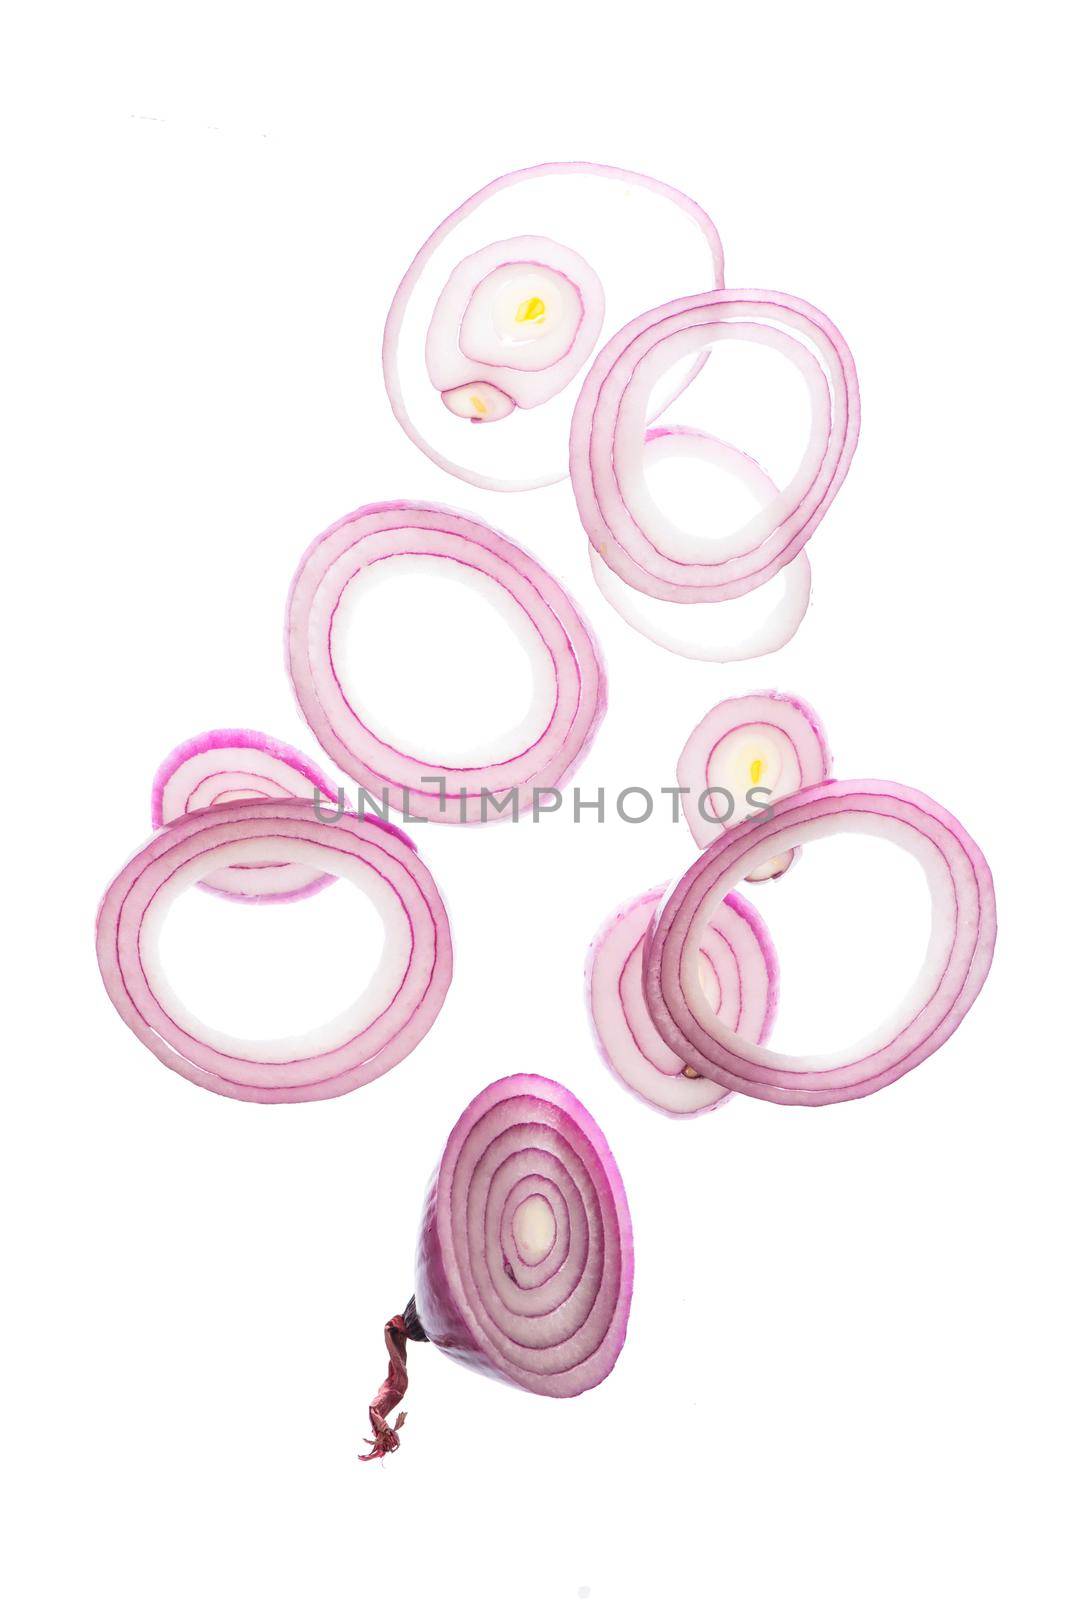 juicy raw onion cut into rings sprinkled on a white plate by aprilphoto